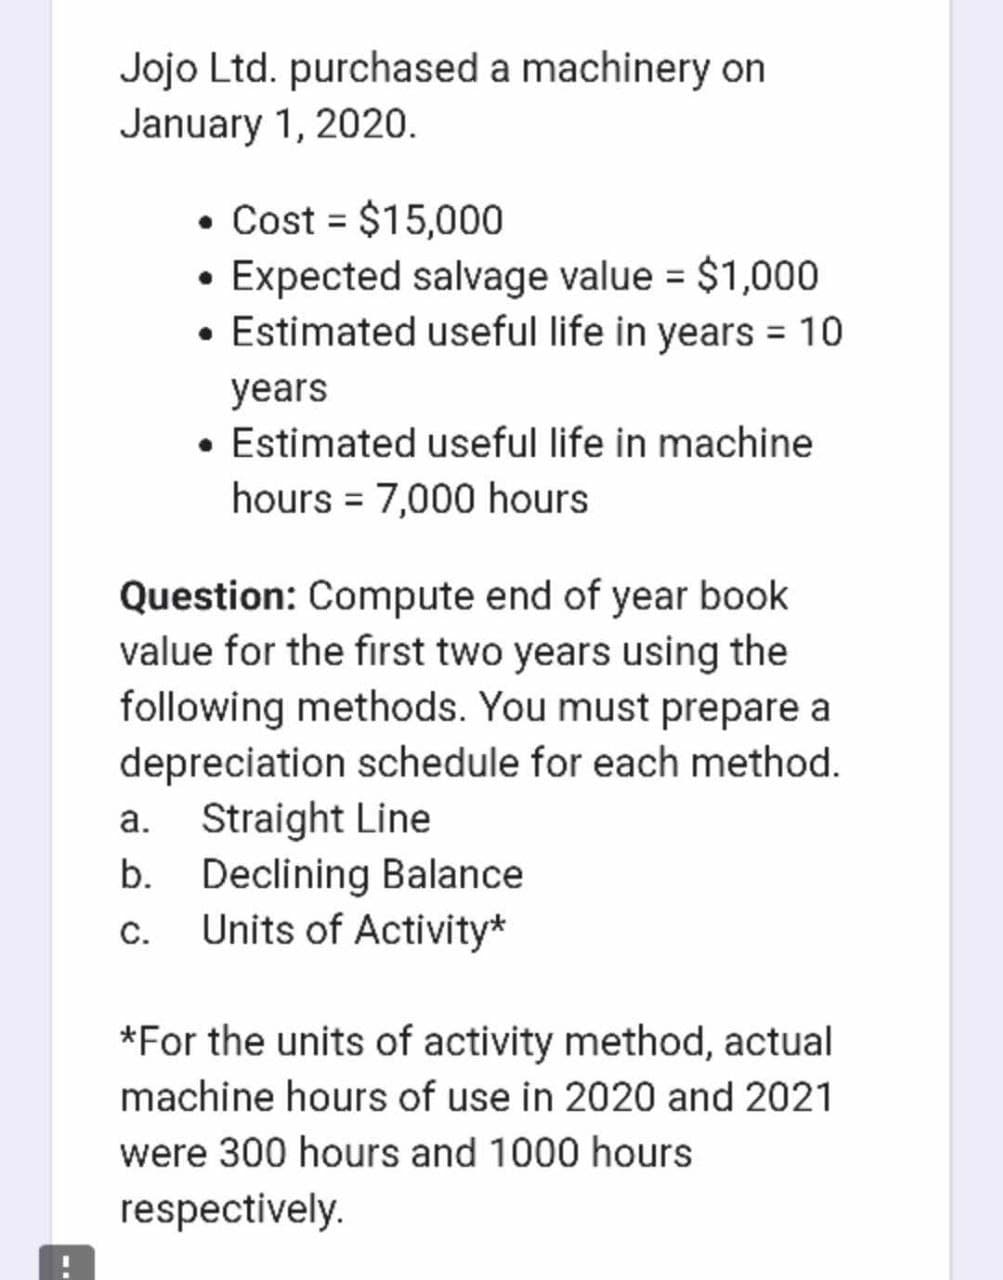 Jojo Ltd. purchased a machinery on
January 1, 2020.
. Cost = $15,000
• Expected salvage value = $1,000
• Estimated useful life in years = 10
years
• Estimated useful life in machine
hours = 7,000 hours
Question: Compute end of year book
value for the first two years using the
following methods. You must prepare a
depreciation schedule for each method.
a. Straight Line
b. Declining Balance
C. Units of Activity*
*For the units of activity method, actual
machine hours of use in 2020 and 2021
were 300 hours and 1000 hours
respectively.